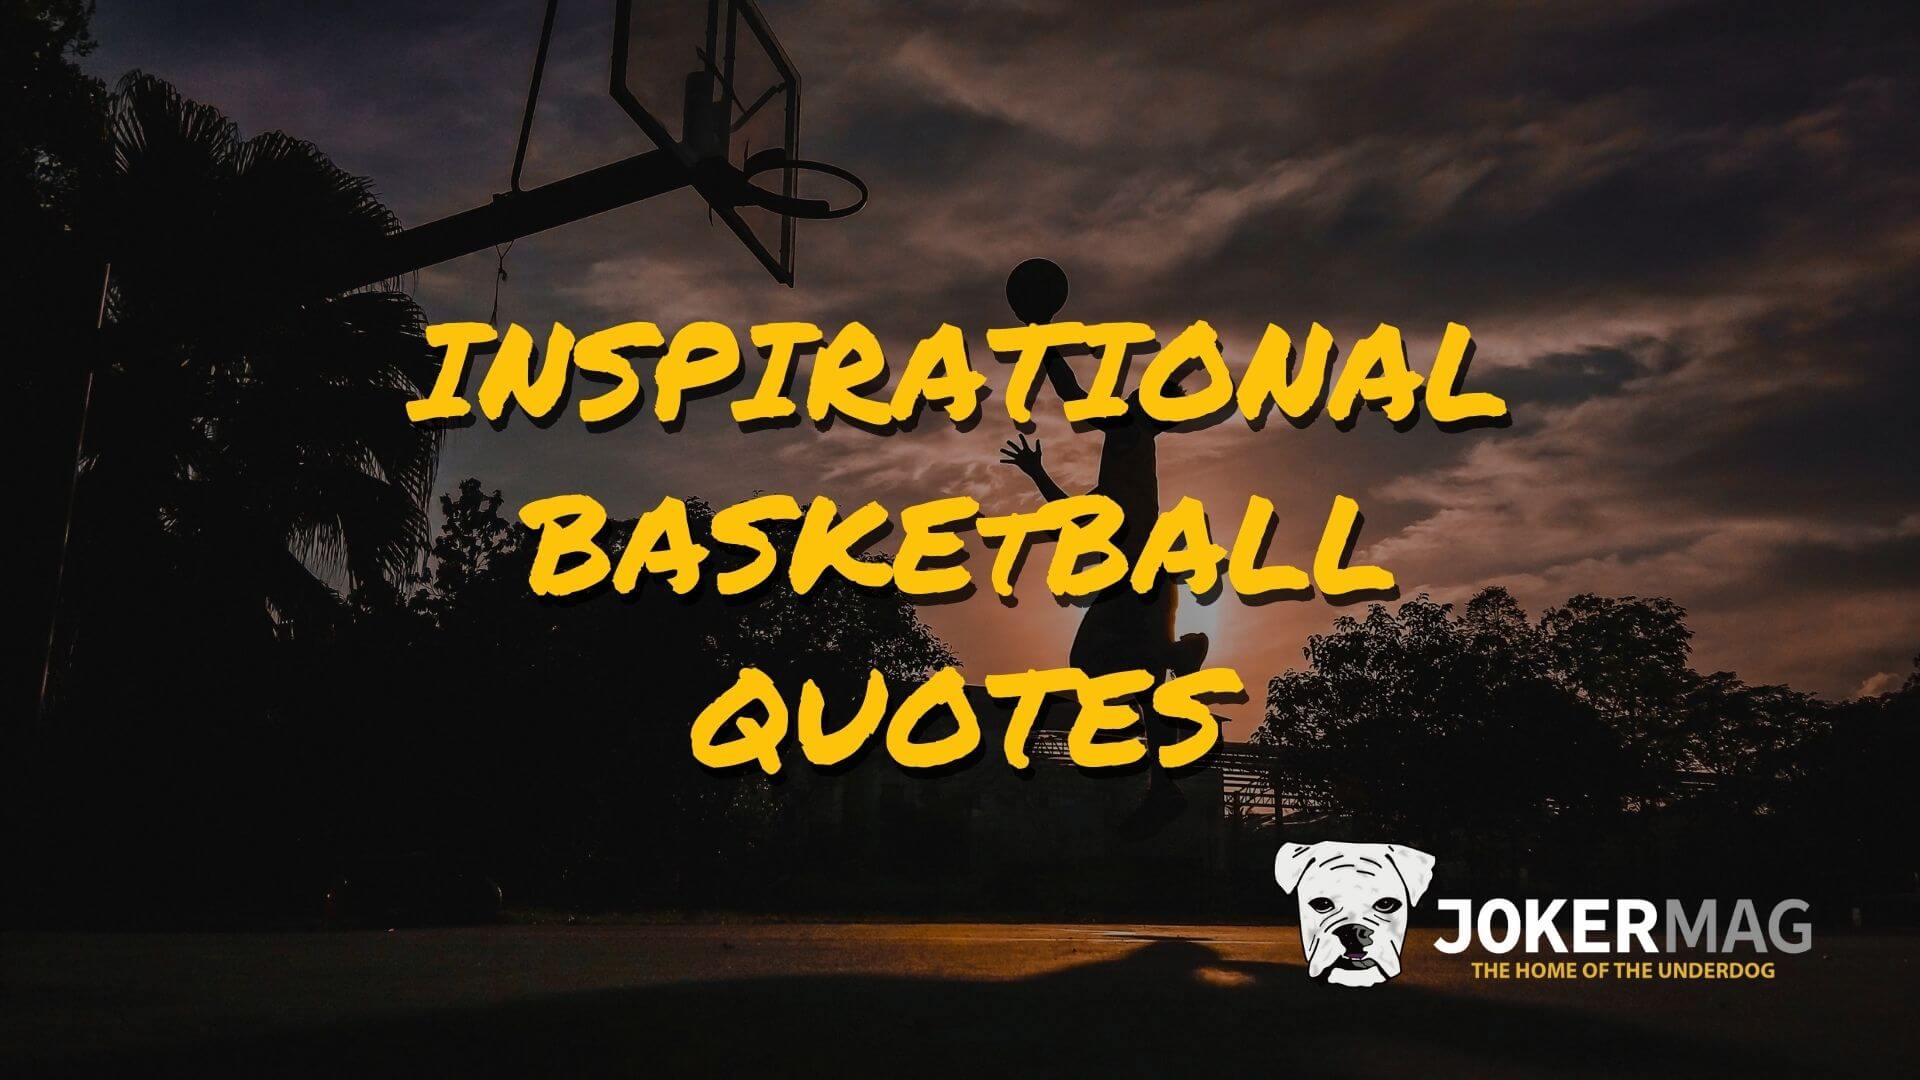 Inspirational Basketball Quotes by Joker Mag - the home of the underdog